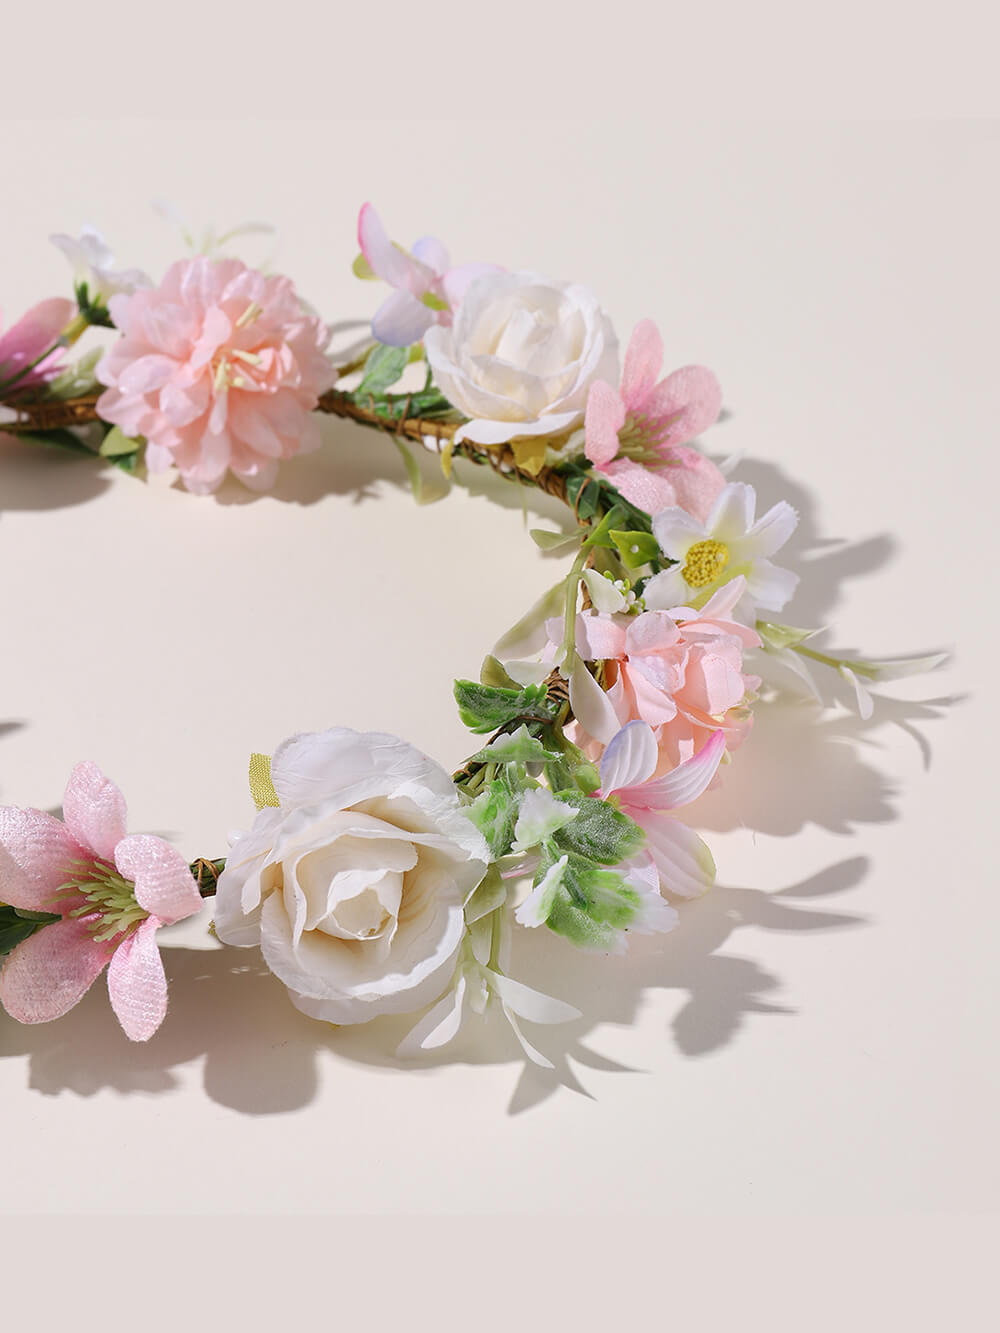 Bridal Flower Crown - Dusty Rose Lily & Malus